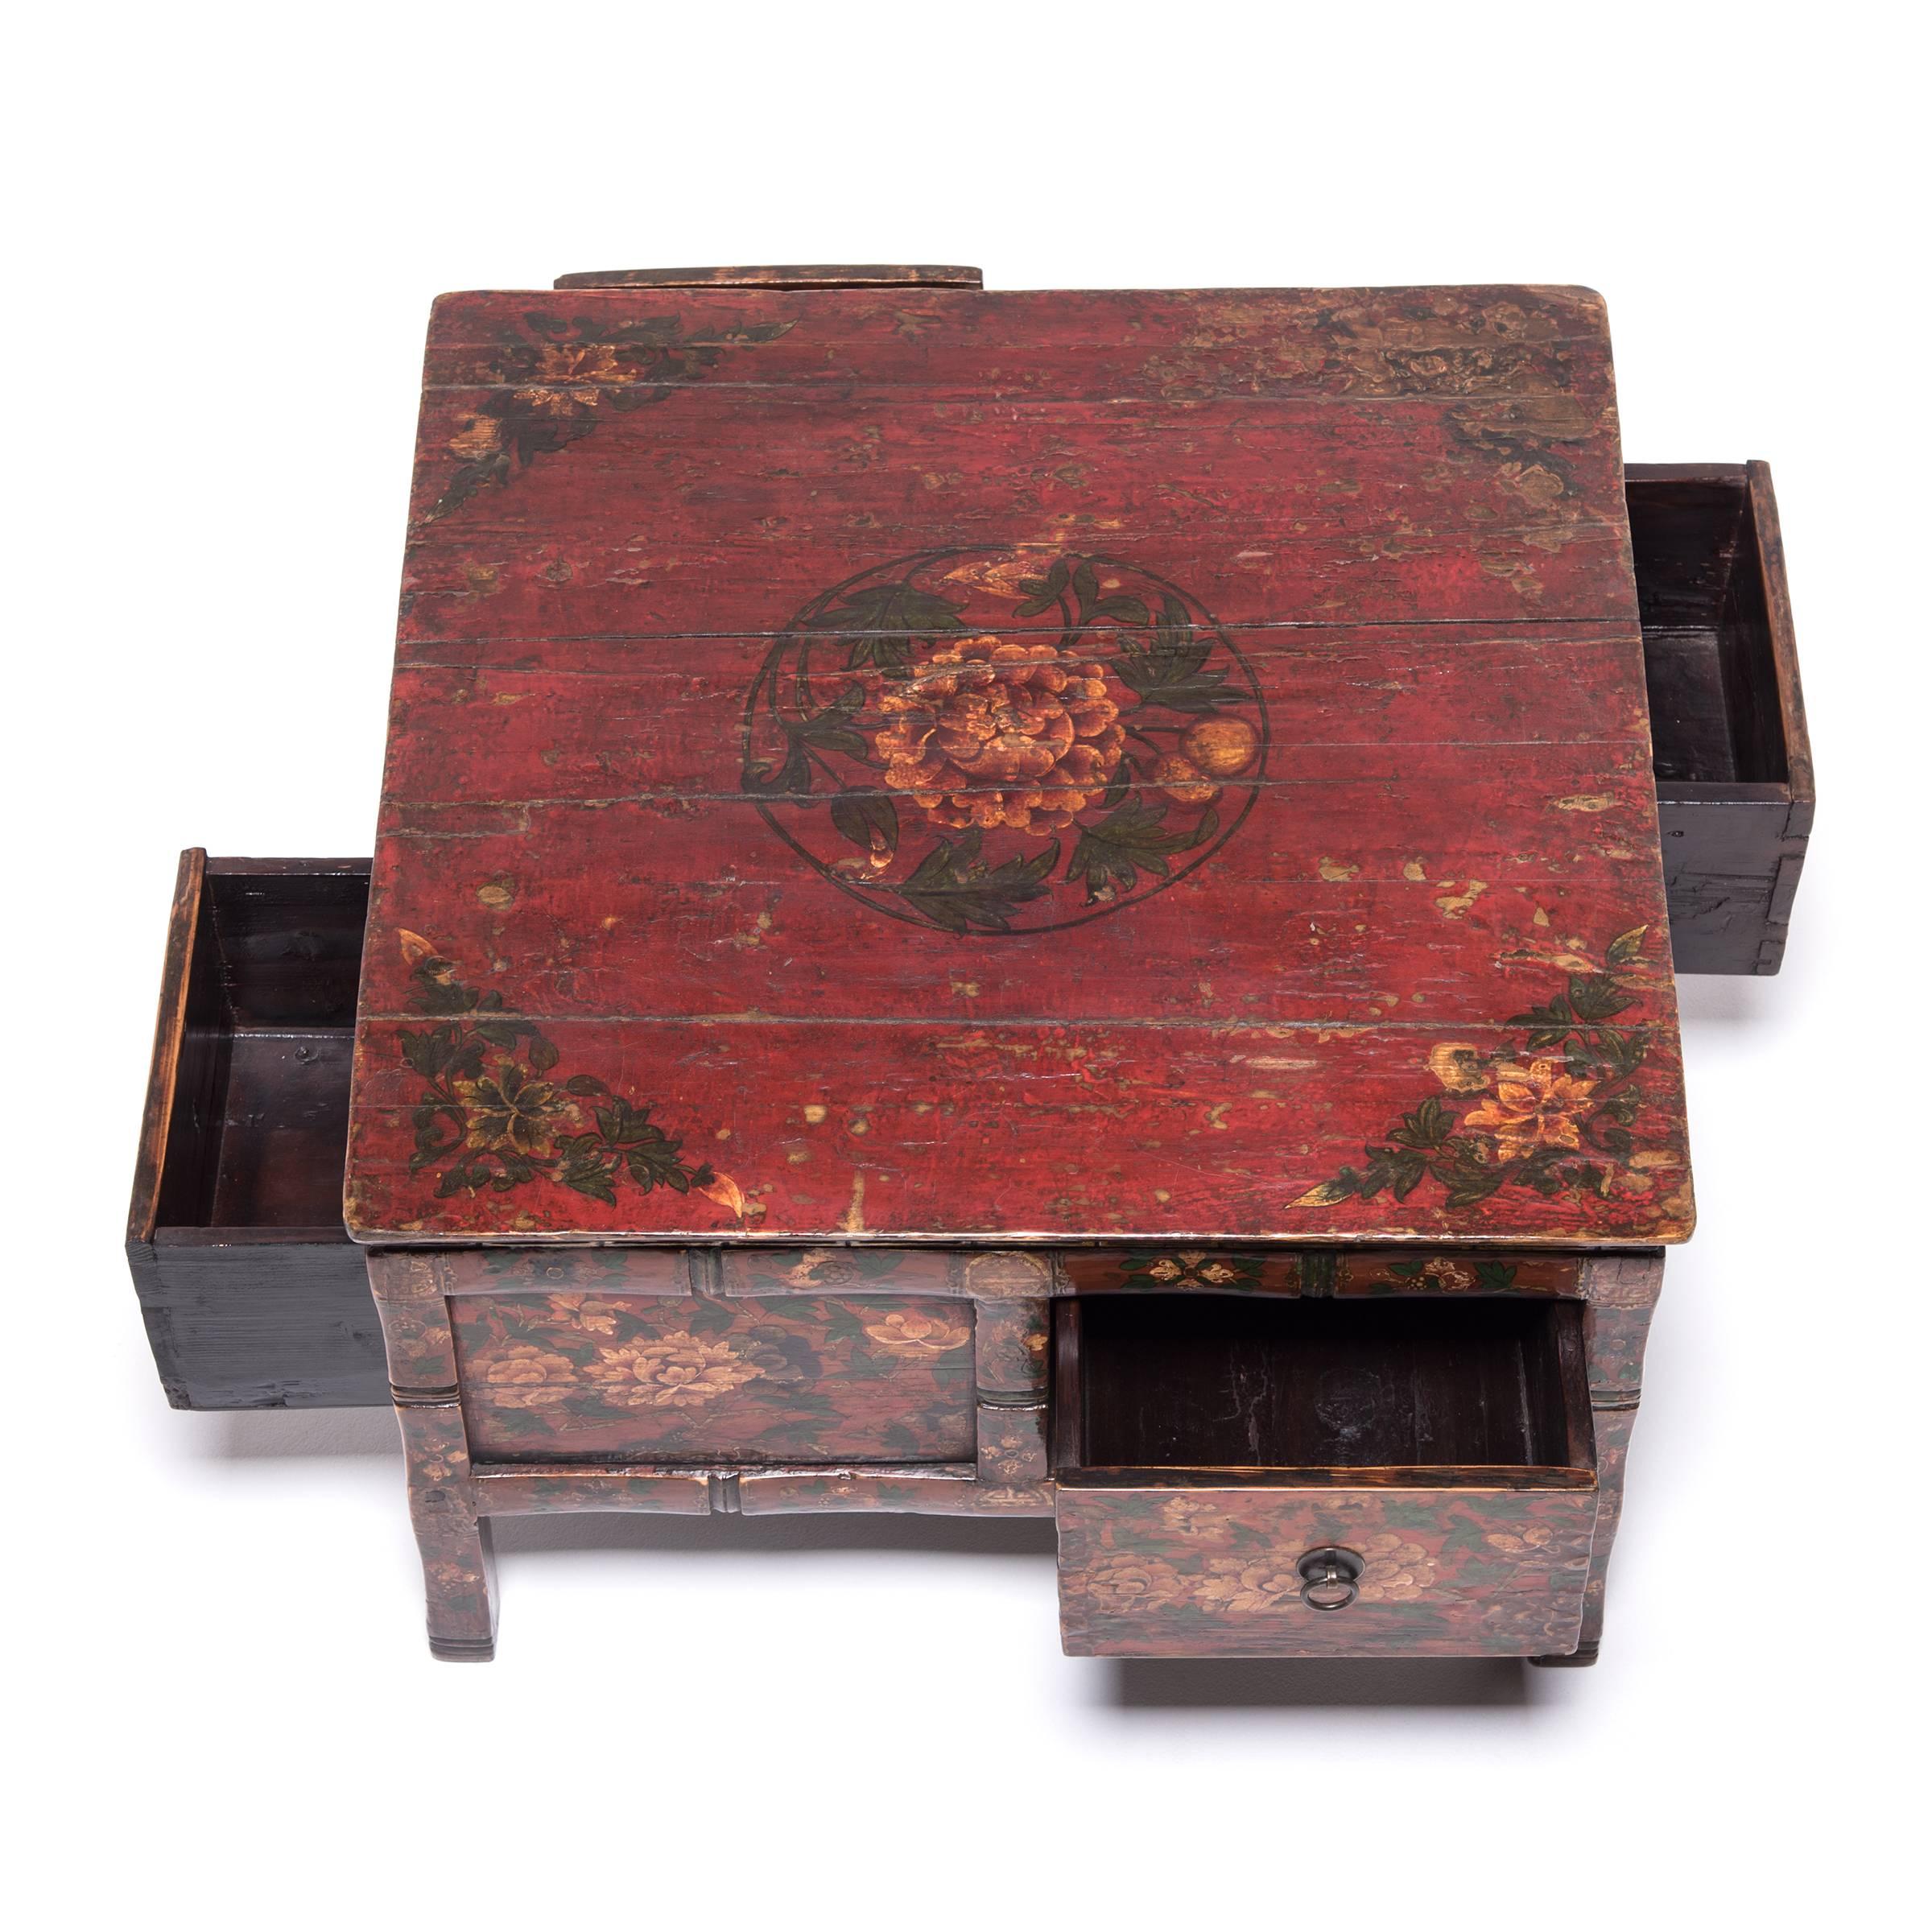 Pine Low Tibetan Peony Table with Four Drawers, c. 1850